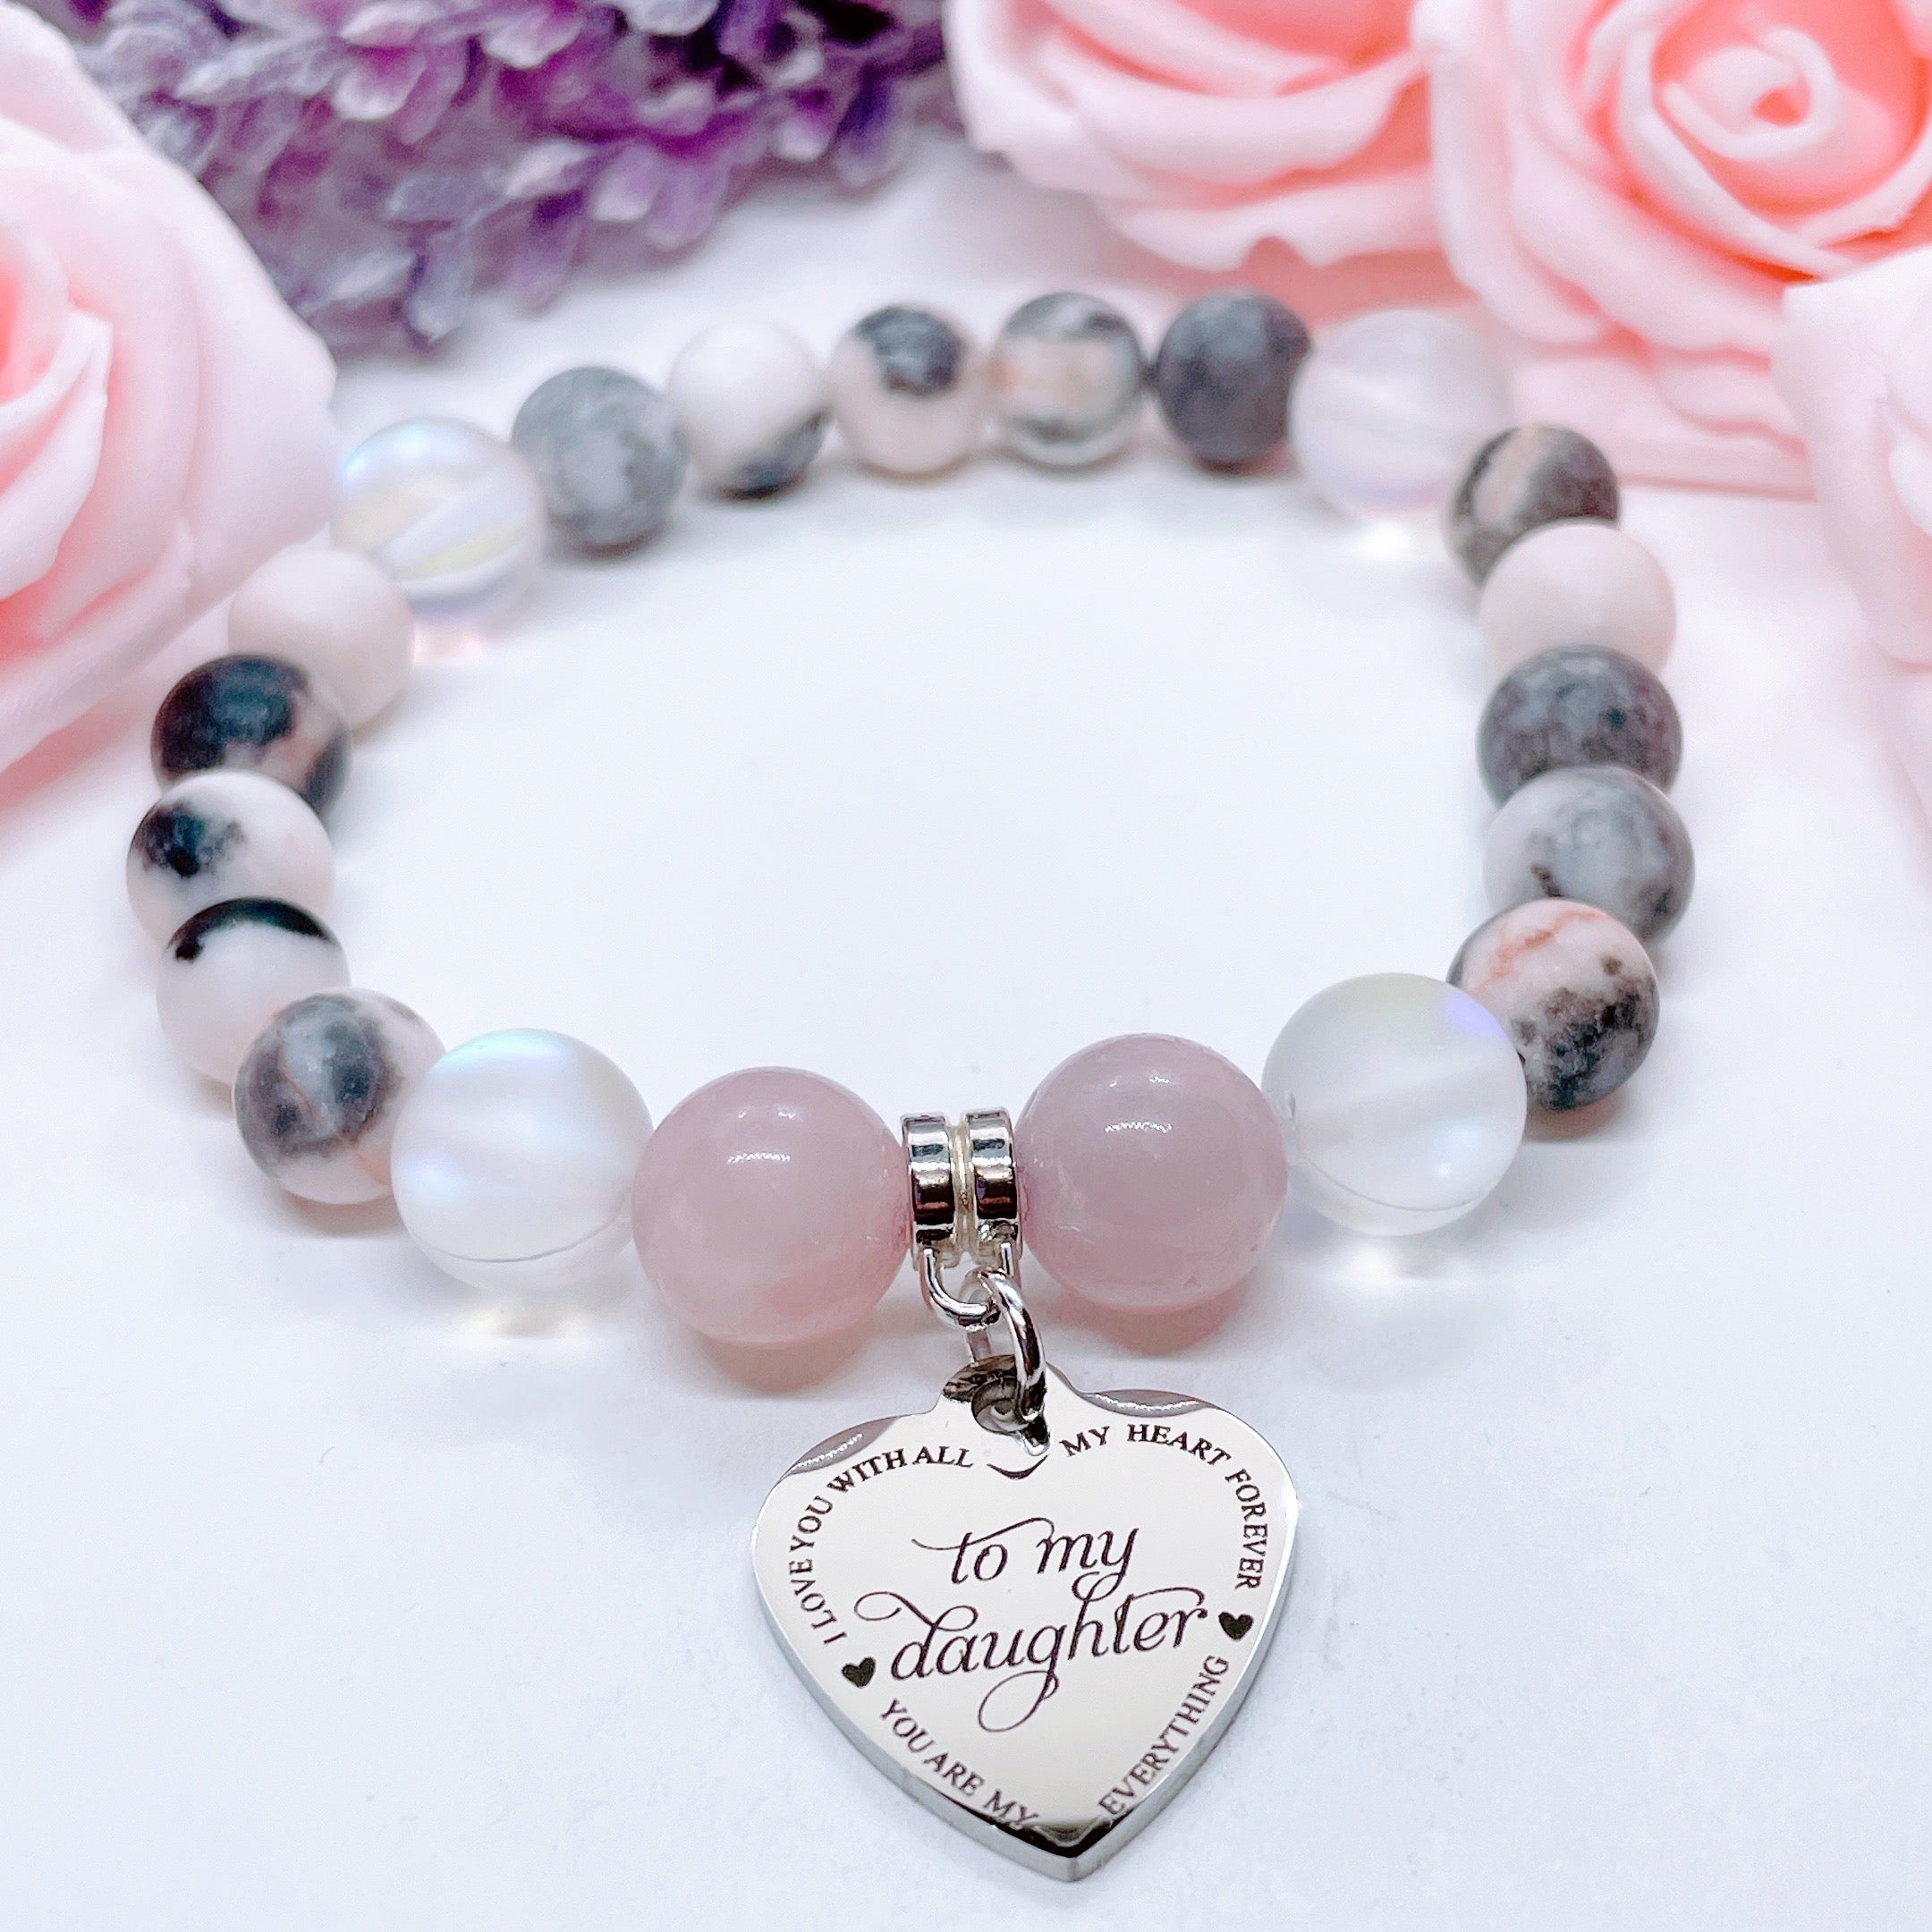 To my Daughter Charm Bracelet